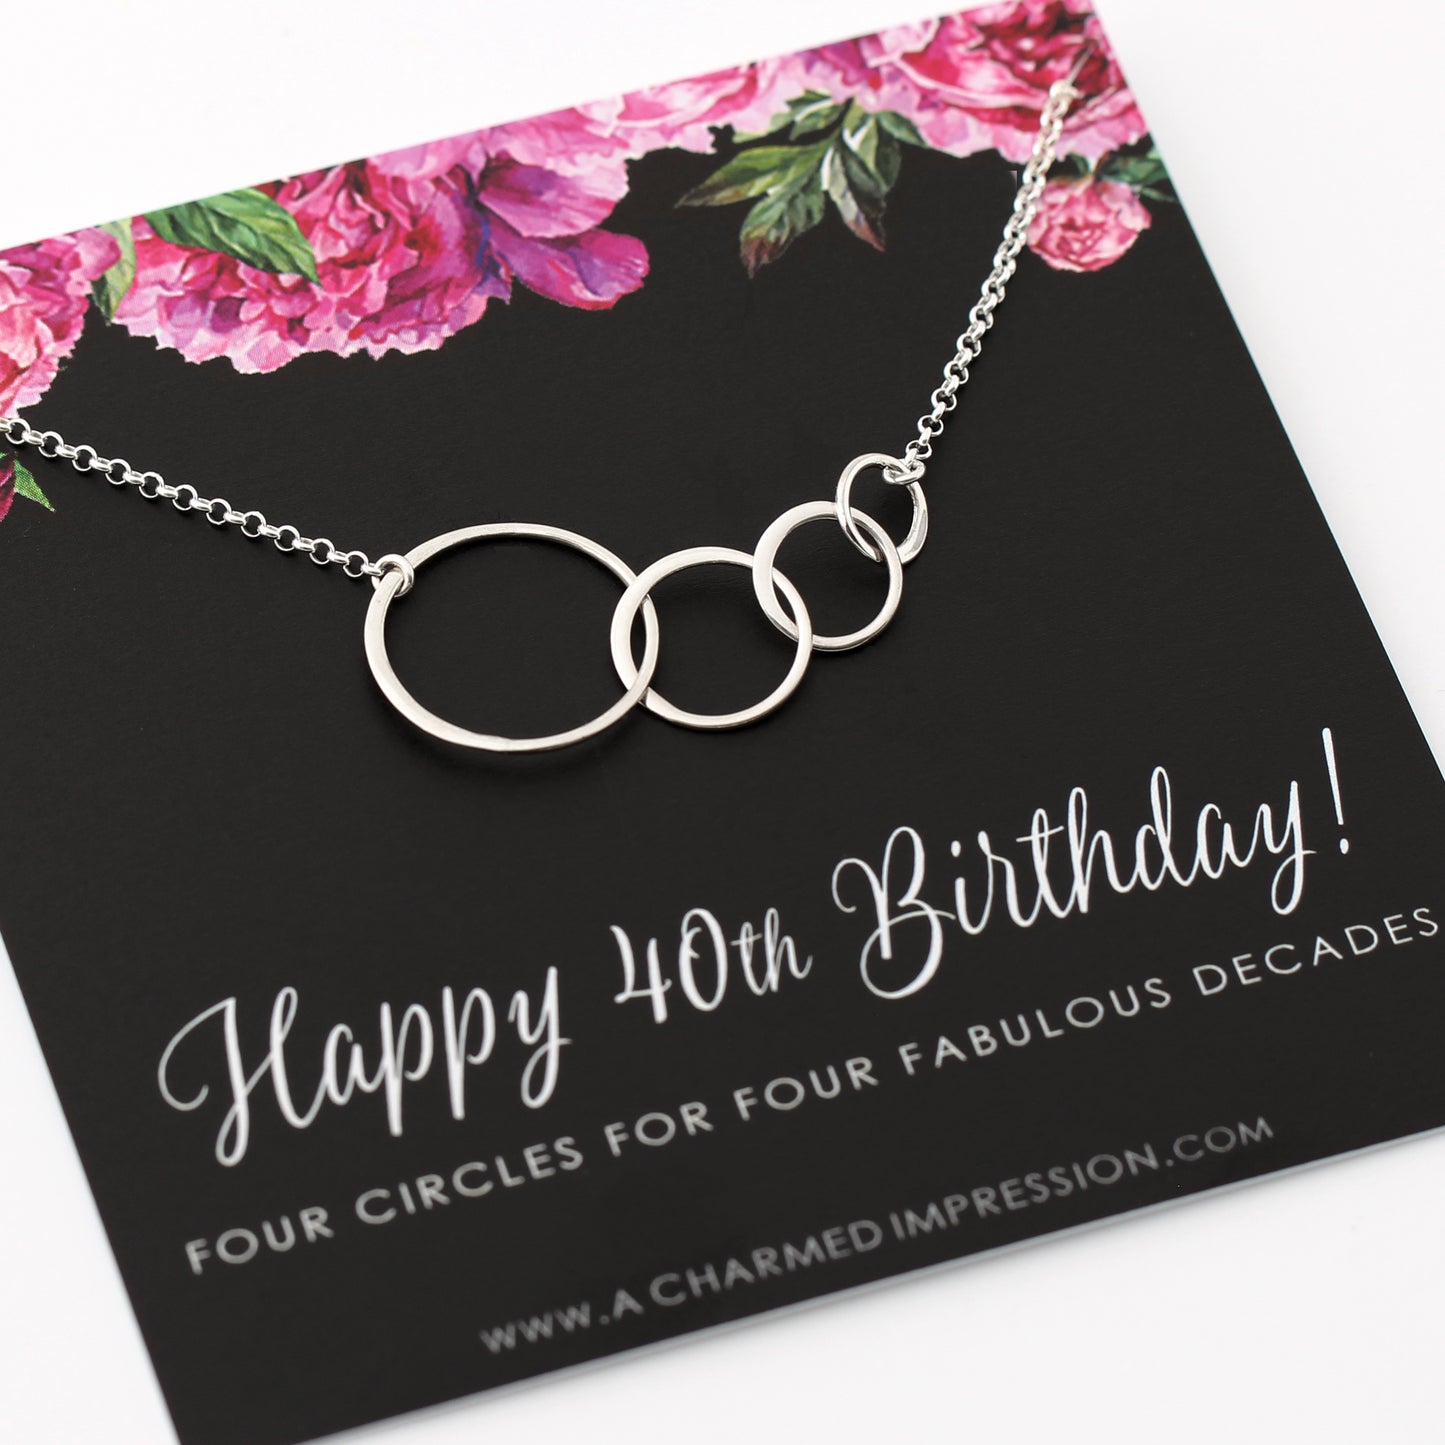 40th Birthday Gift for Women • Silver • Four Connected Circles • 4 Decades Celebration • 40 Years Old • Happy Fortieth Birthday Gifts • 4 Interlocking Rings Necklace